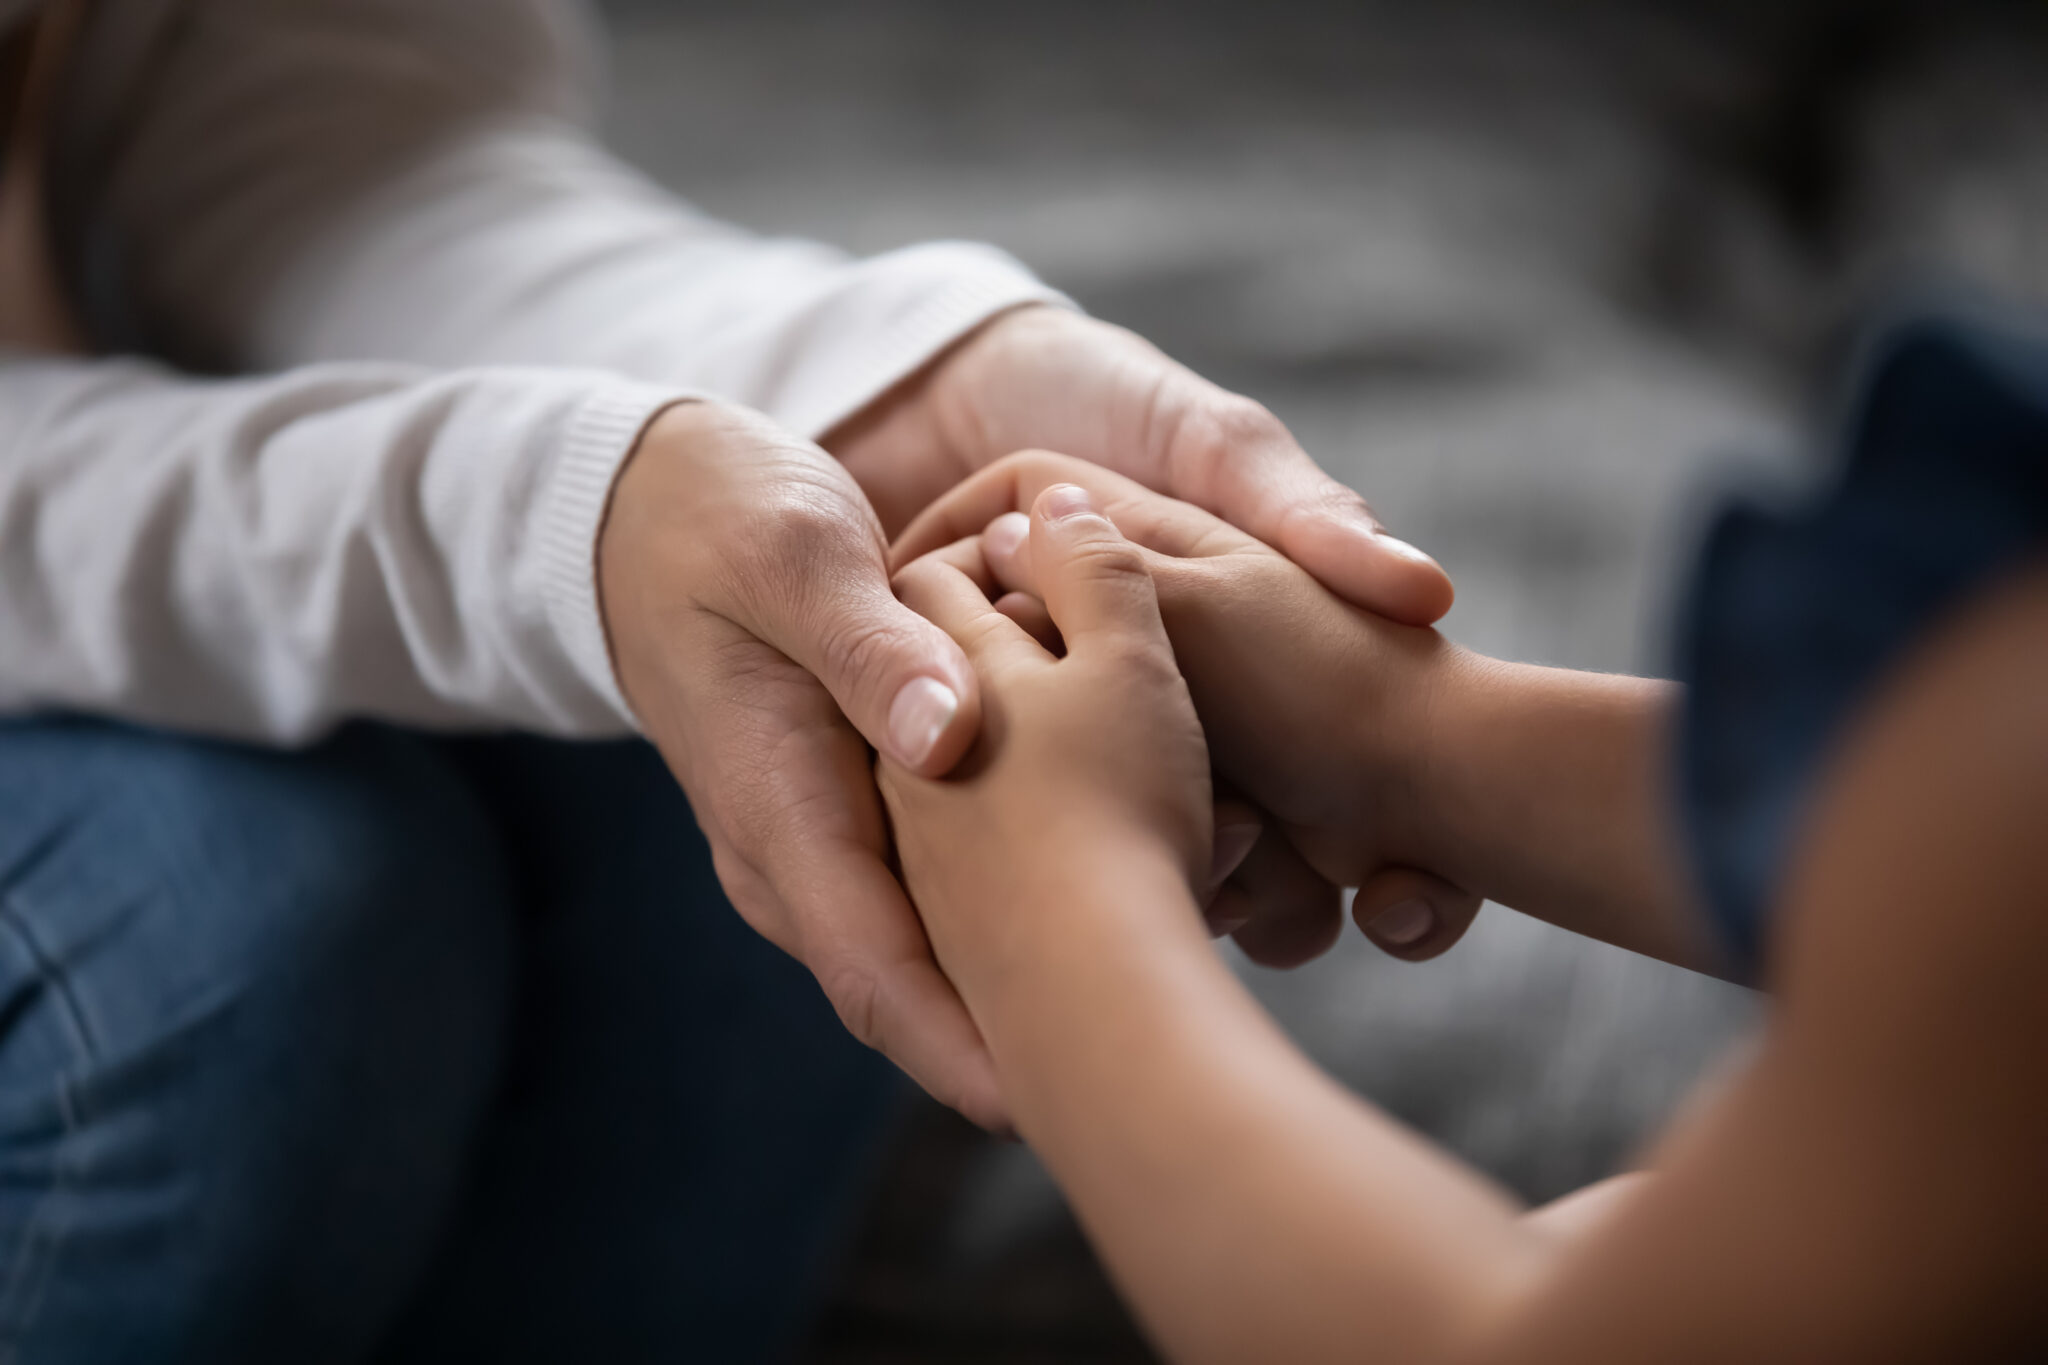 An adults holding the hands of a child lovingly.